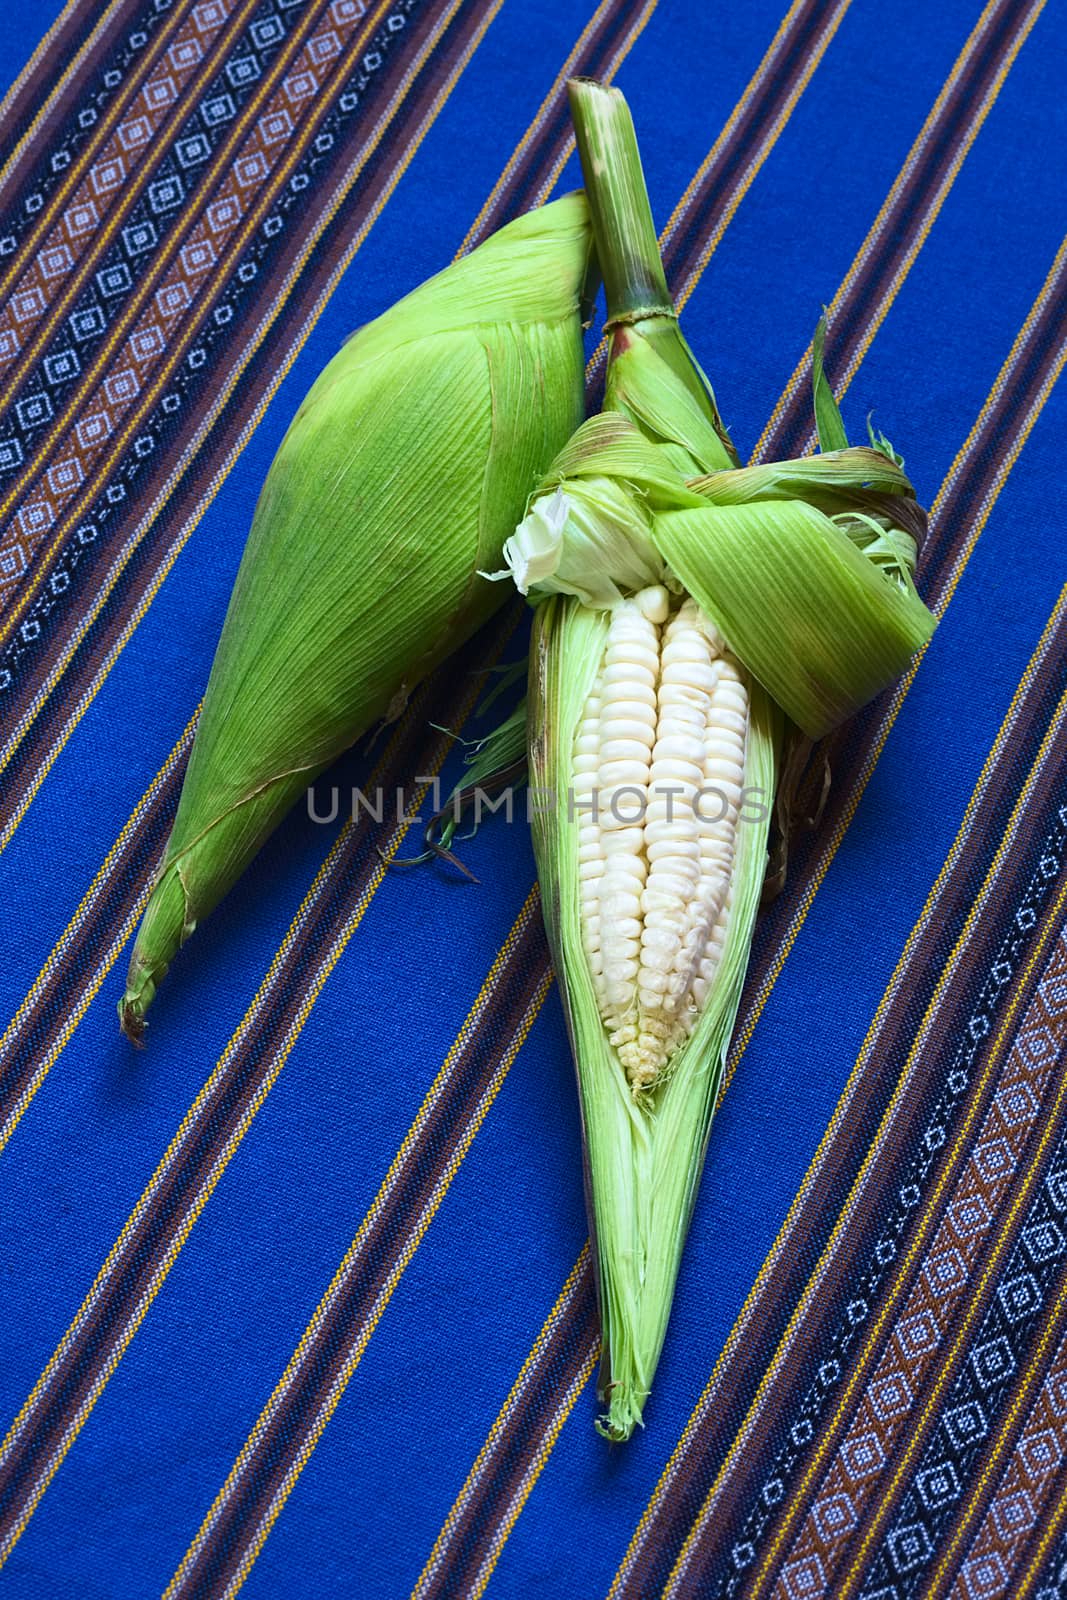 Cobs of white corn called Choclo (Spanish), in English Peruvian or Cuzco corn, typically found in Peru and Bolivia and used in traditional dishes, such as the Peruvian ceviche (Photographed with natural light)     